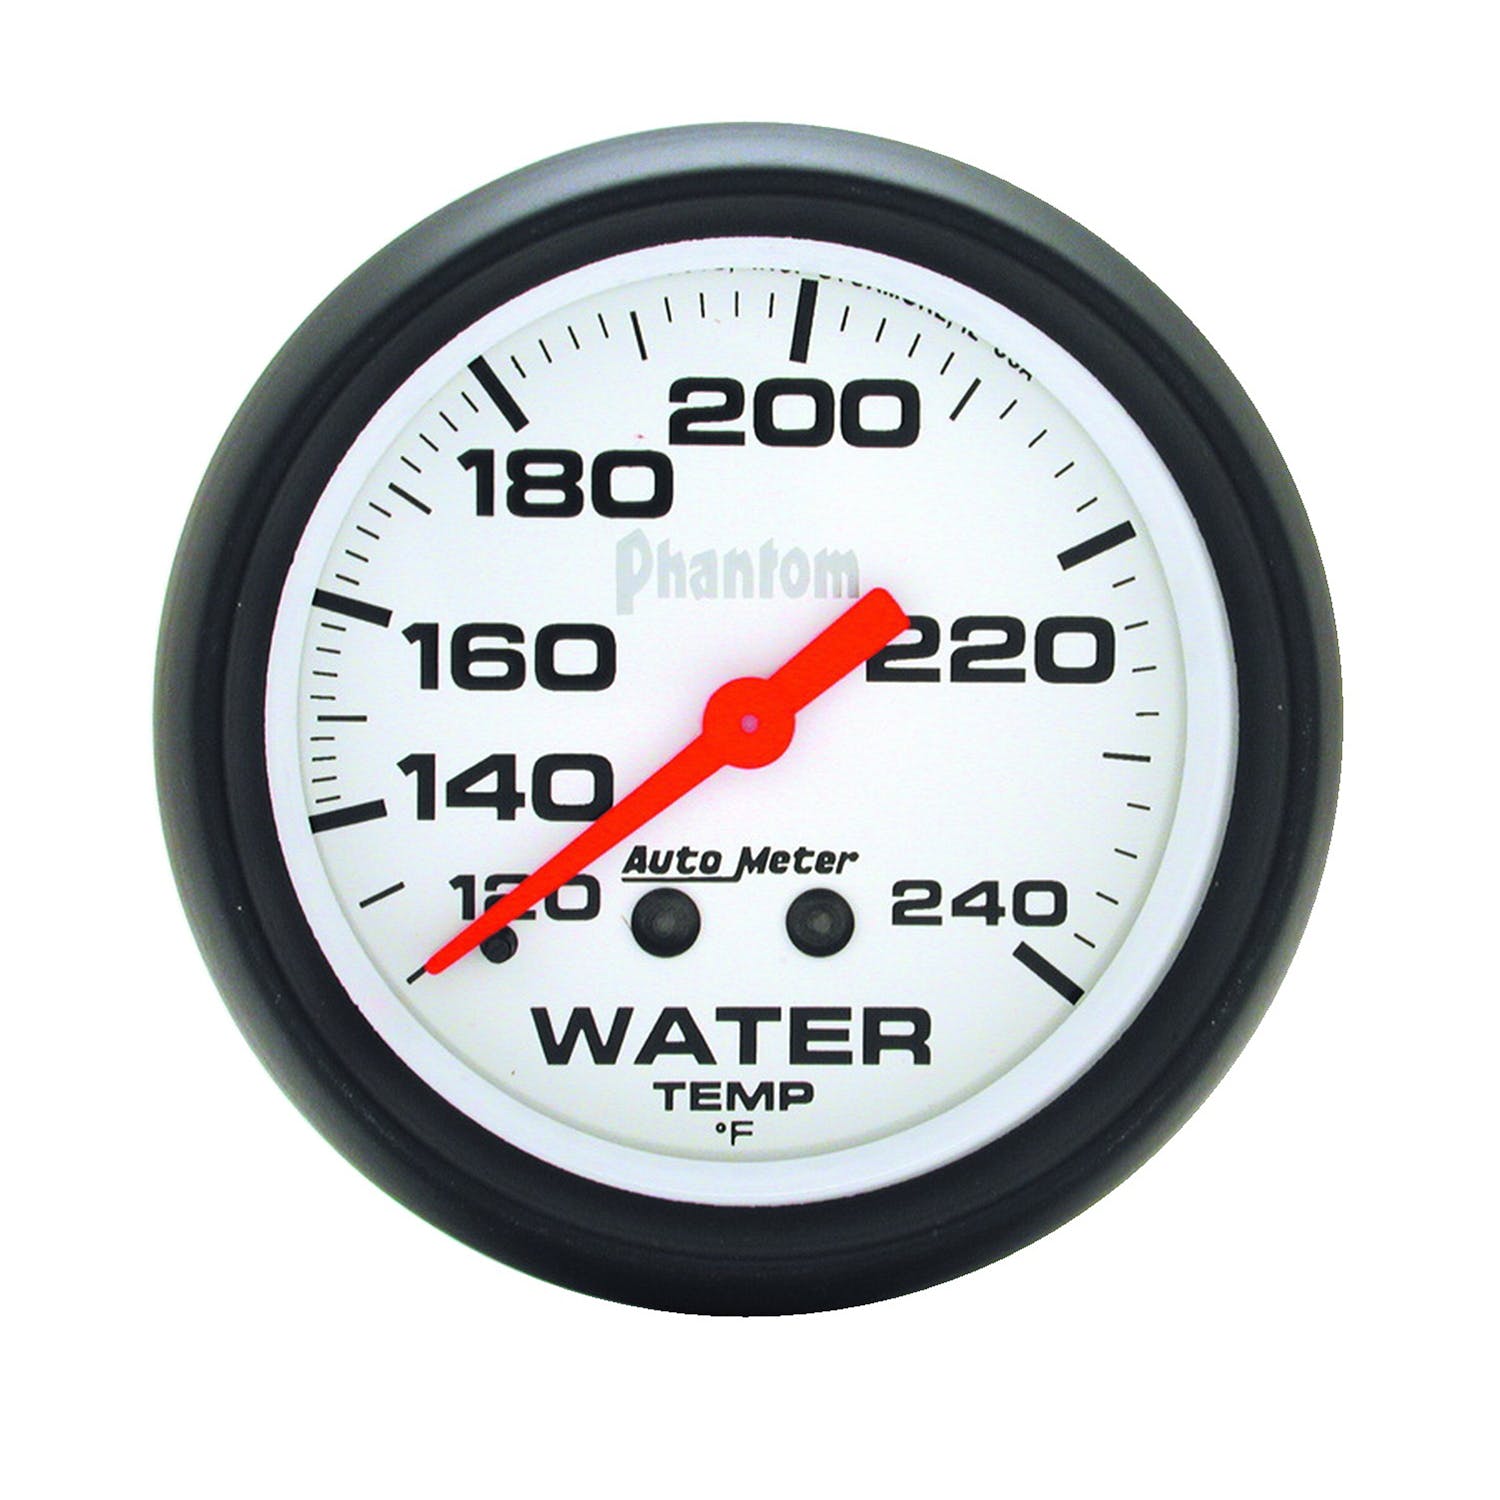 AutoMeter Products 5832 Water Temp 120-240F